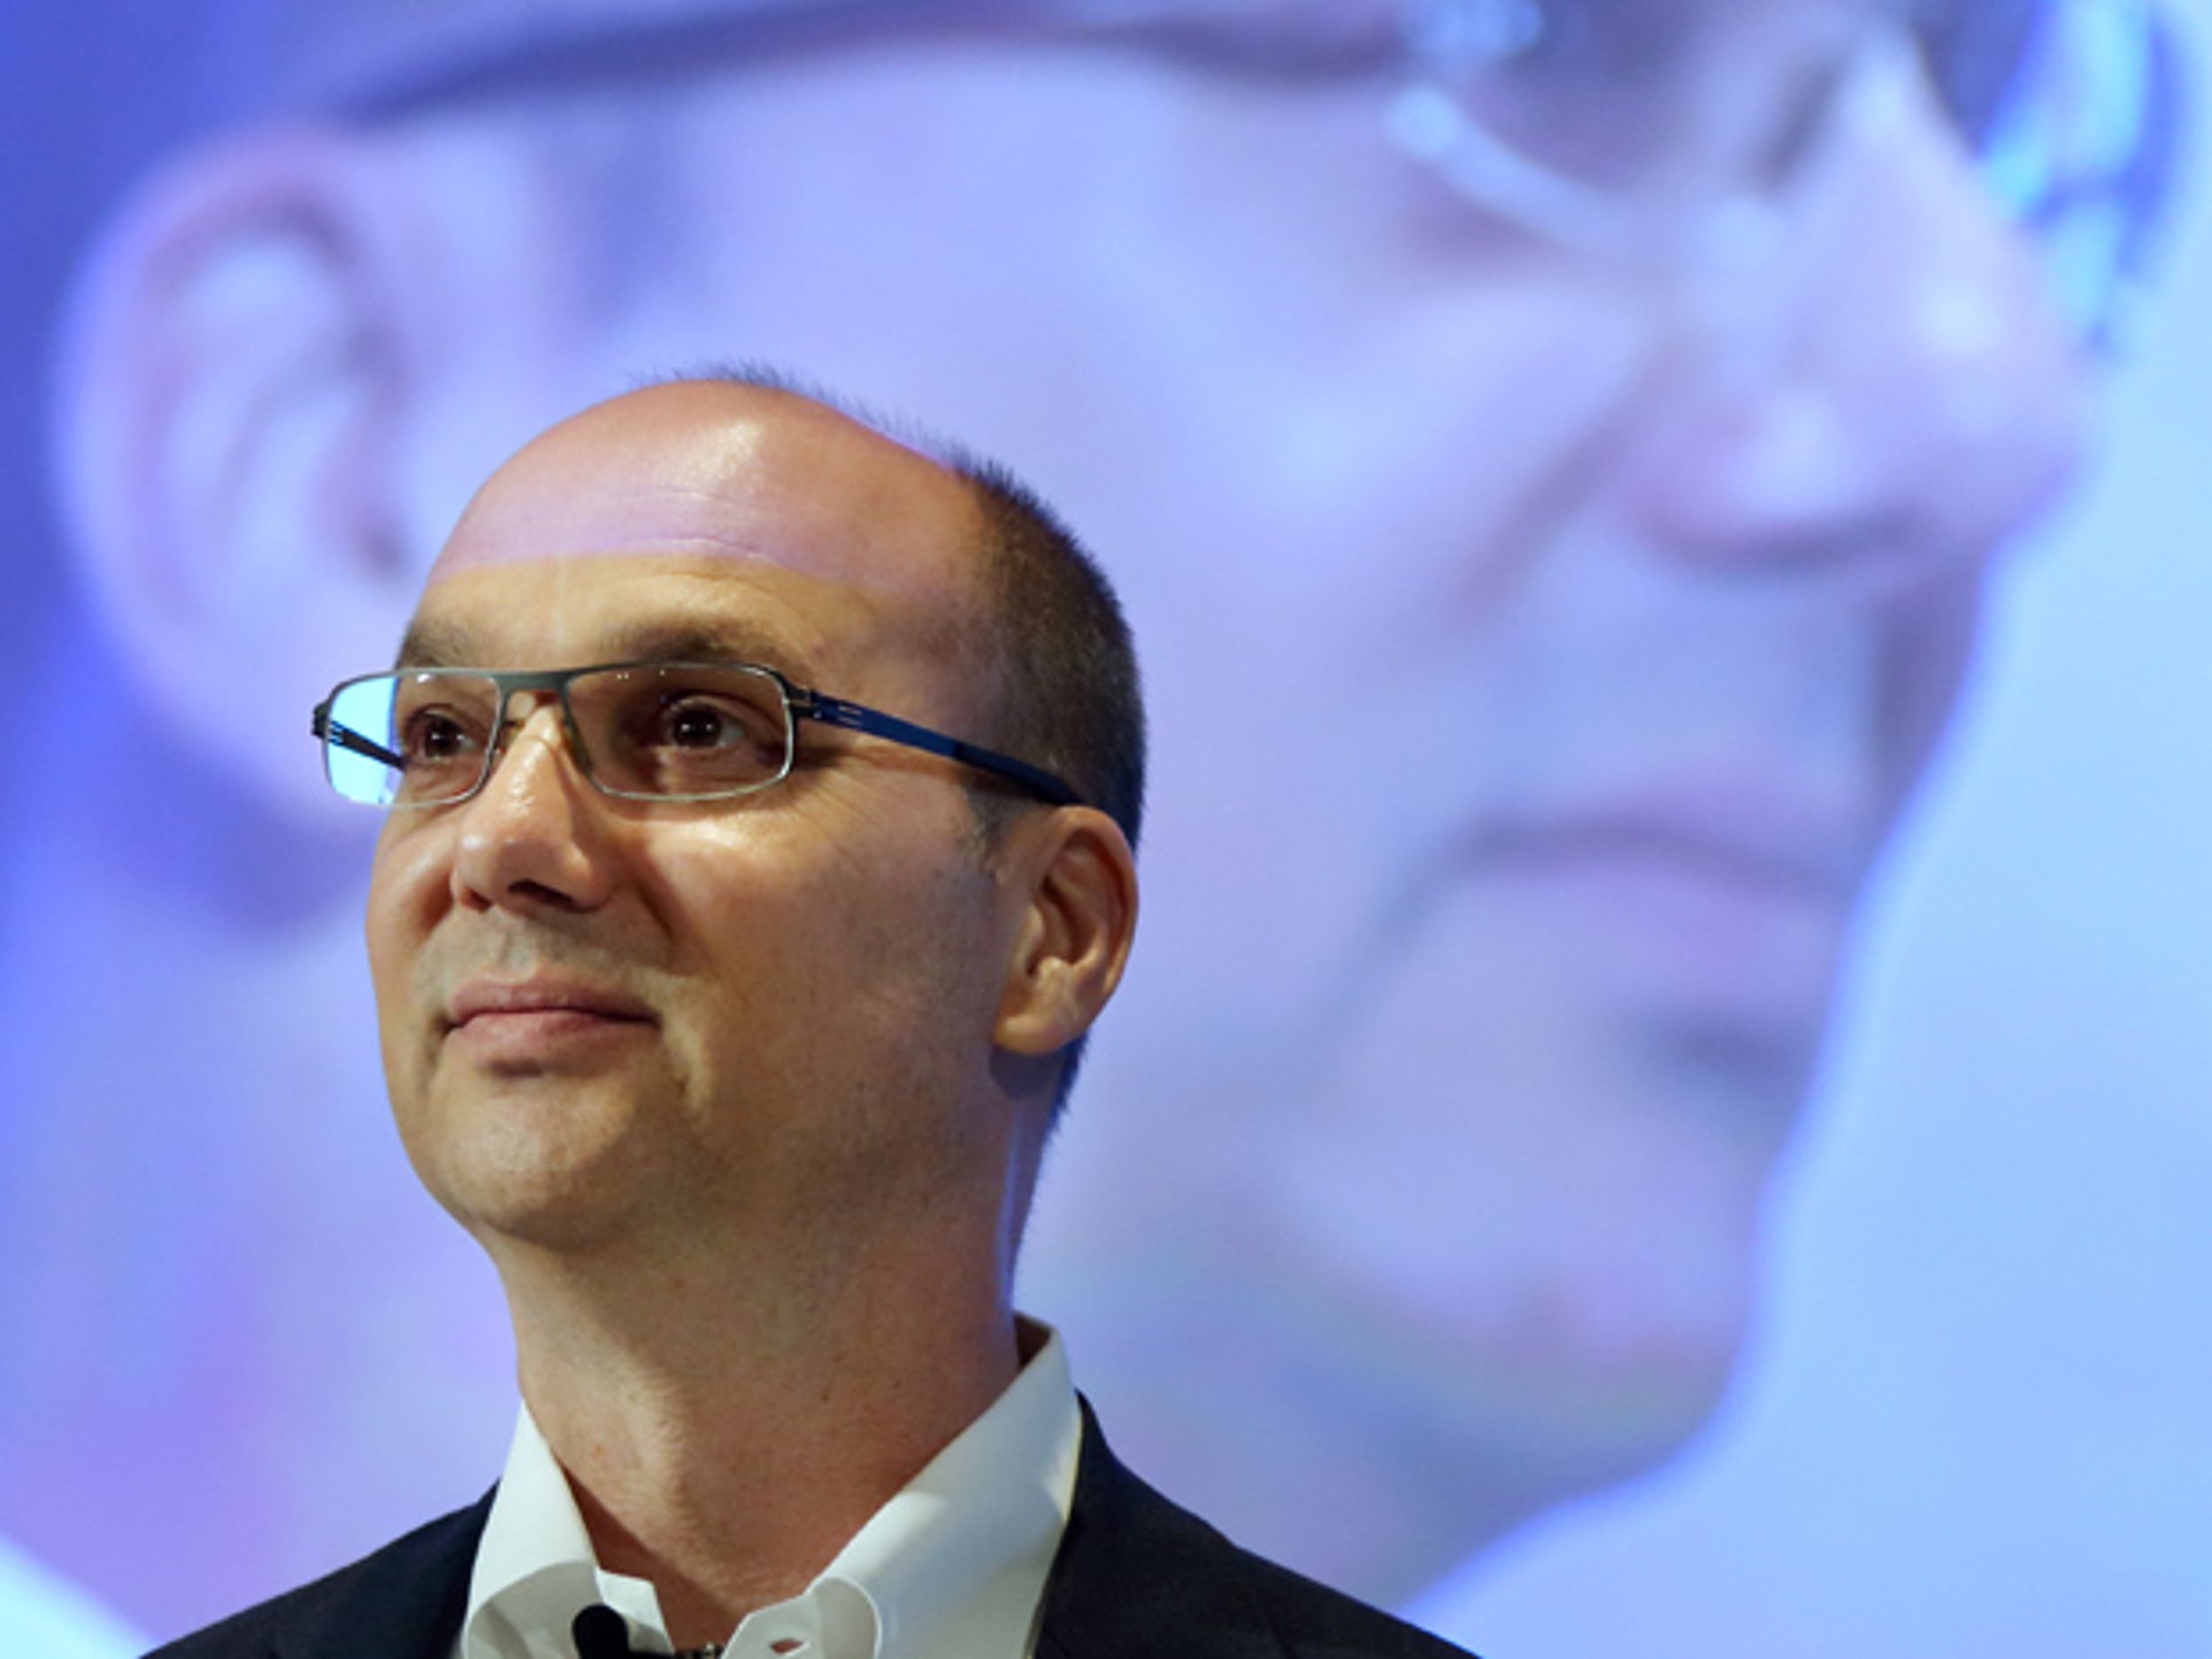 Android Creator Andy Rubin's Playground for Hardware Startups